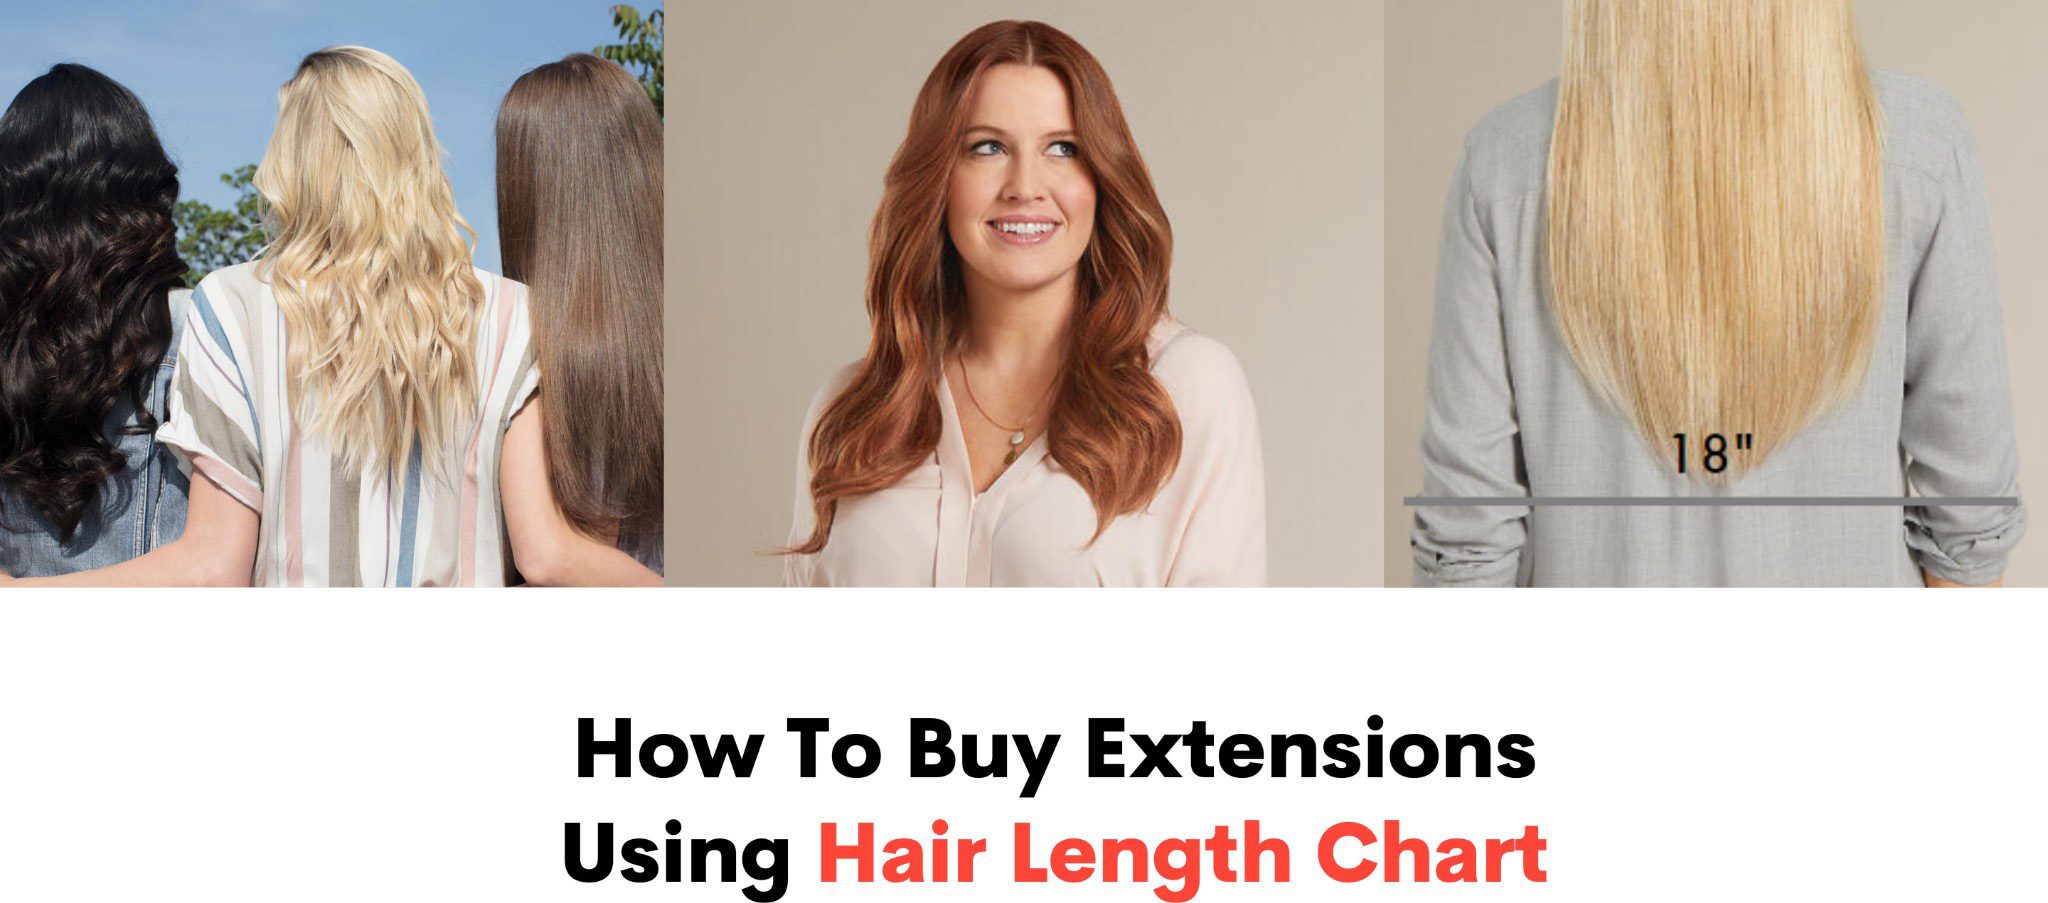 How to Buy Extensions Using Hair Length Chart